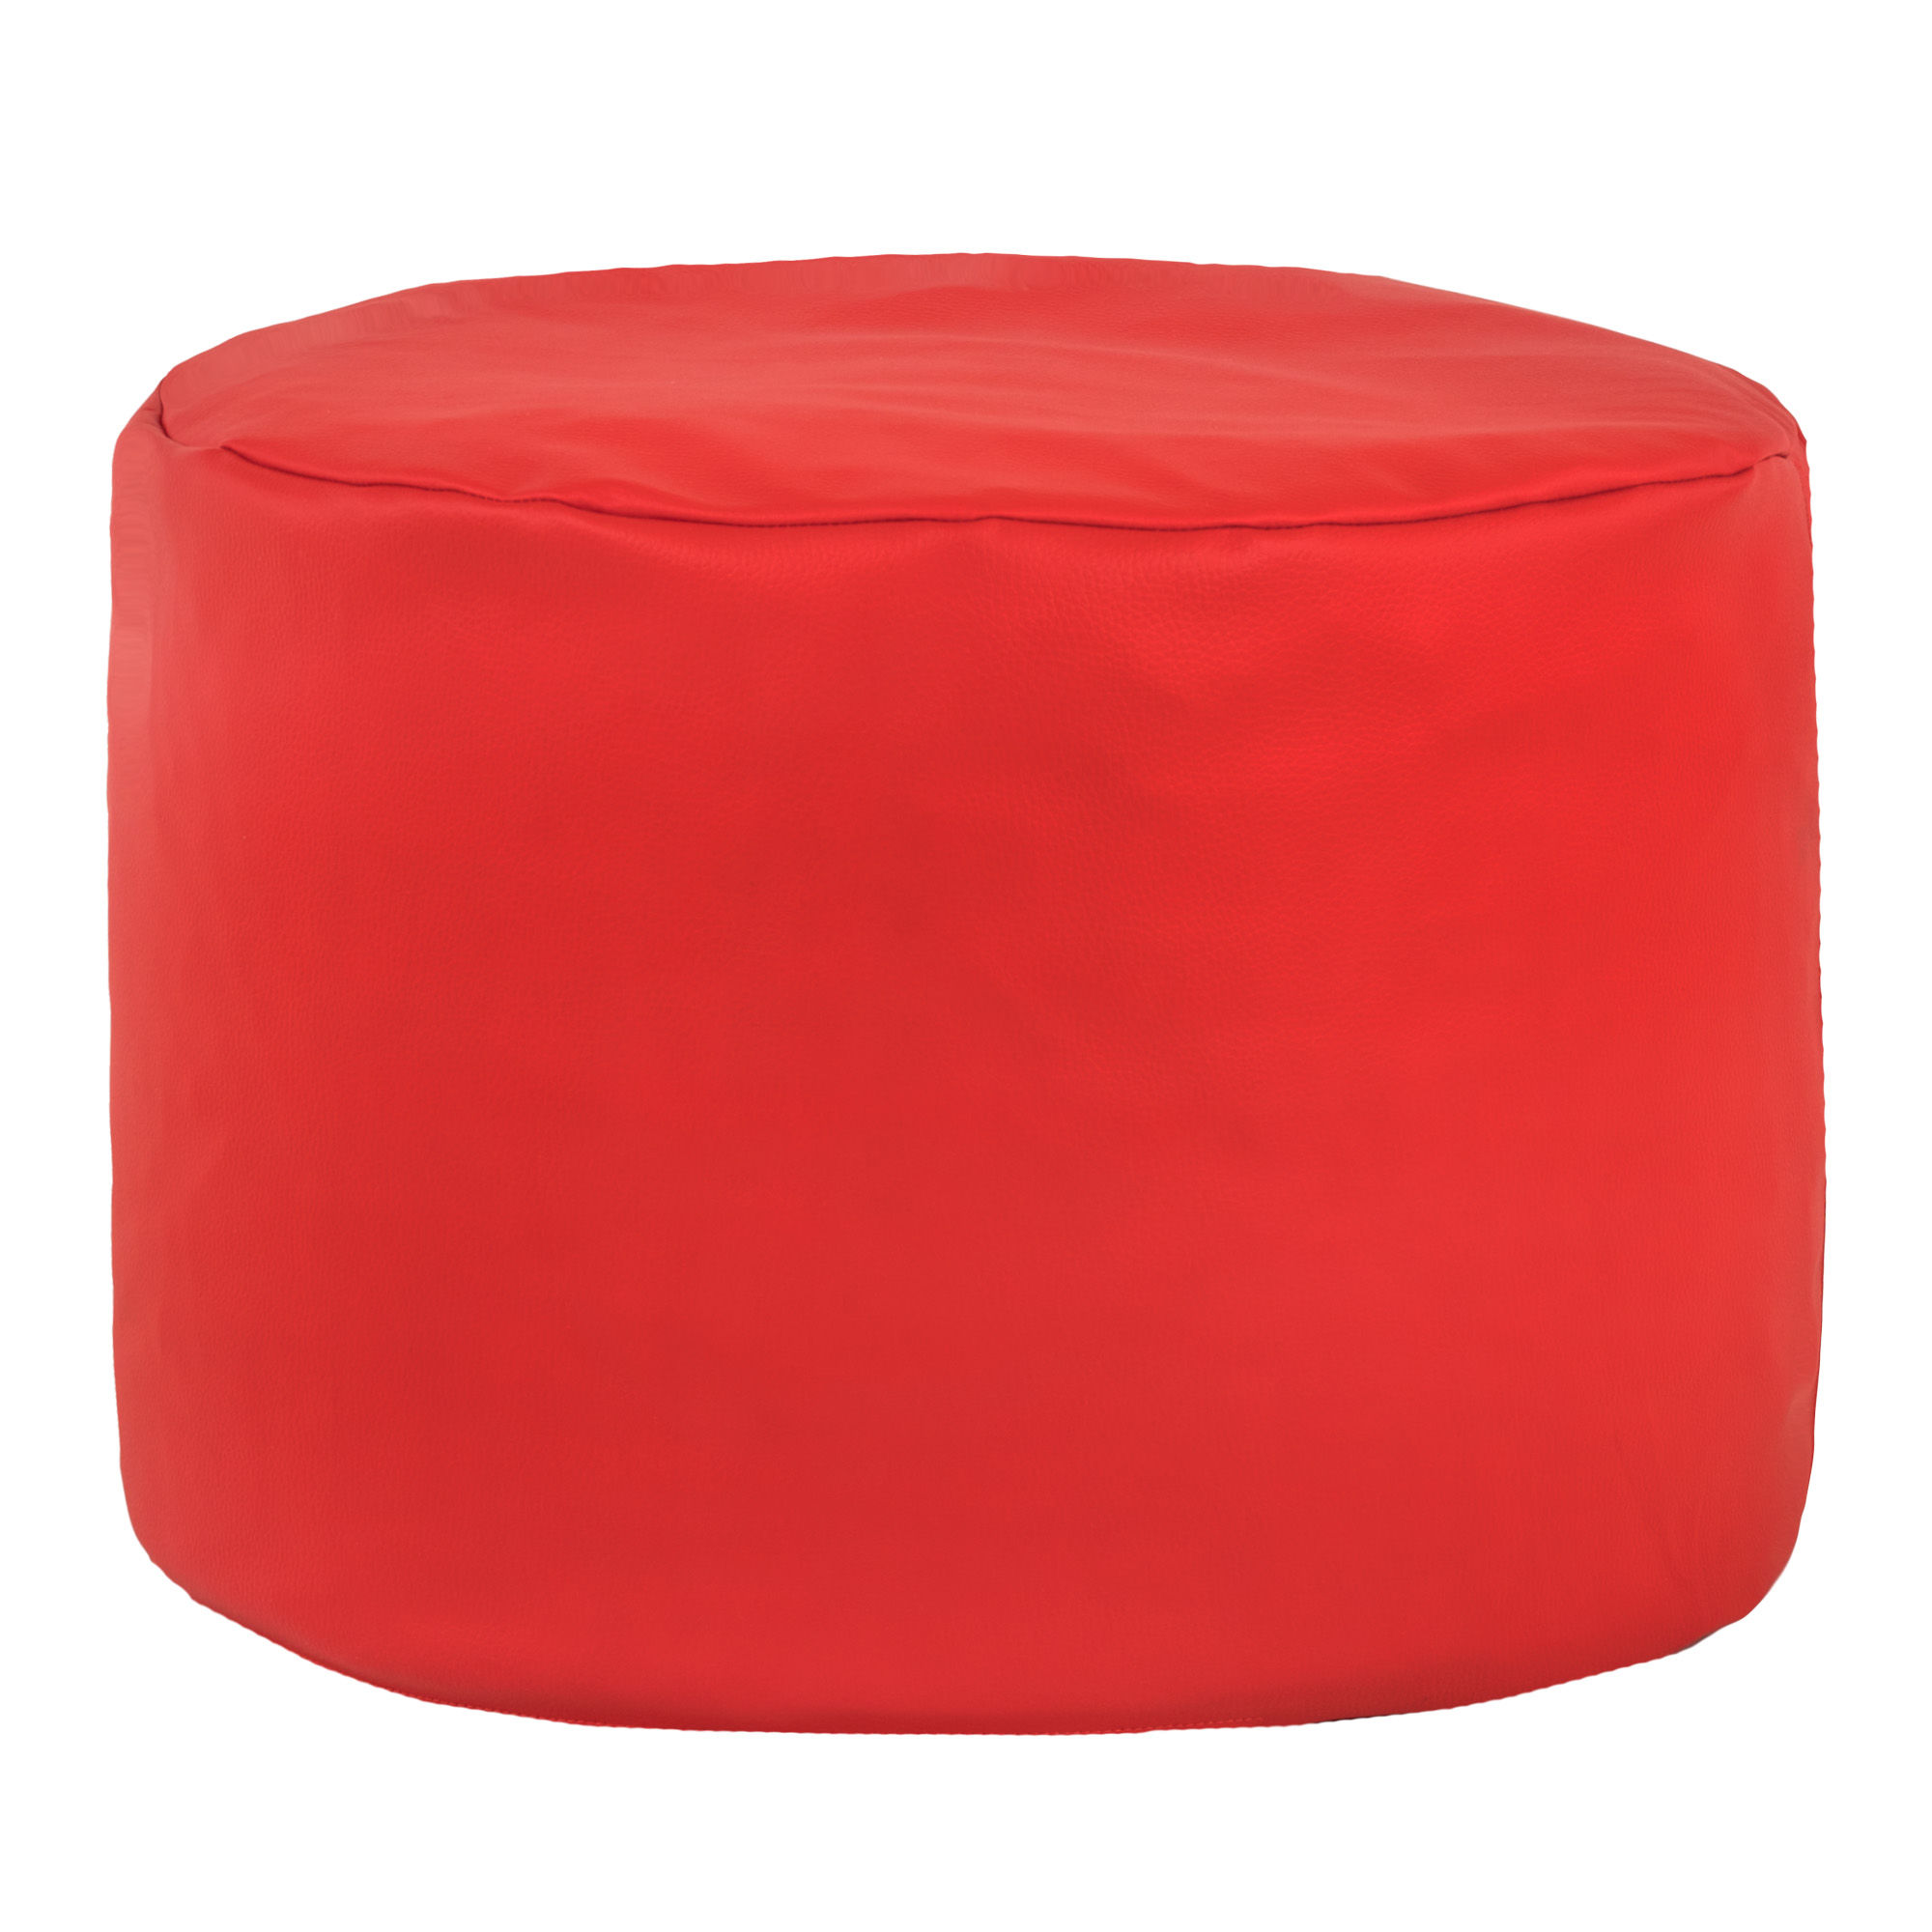 Red pouf roller pu leather - ITALPOUF